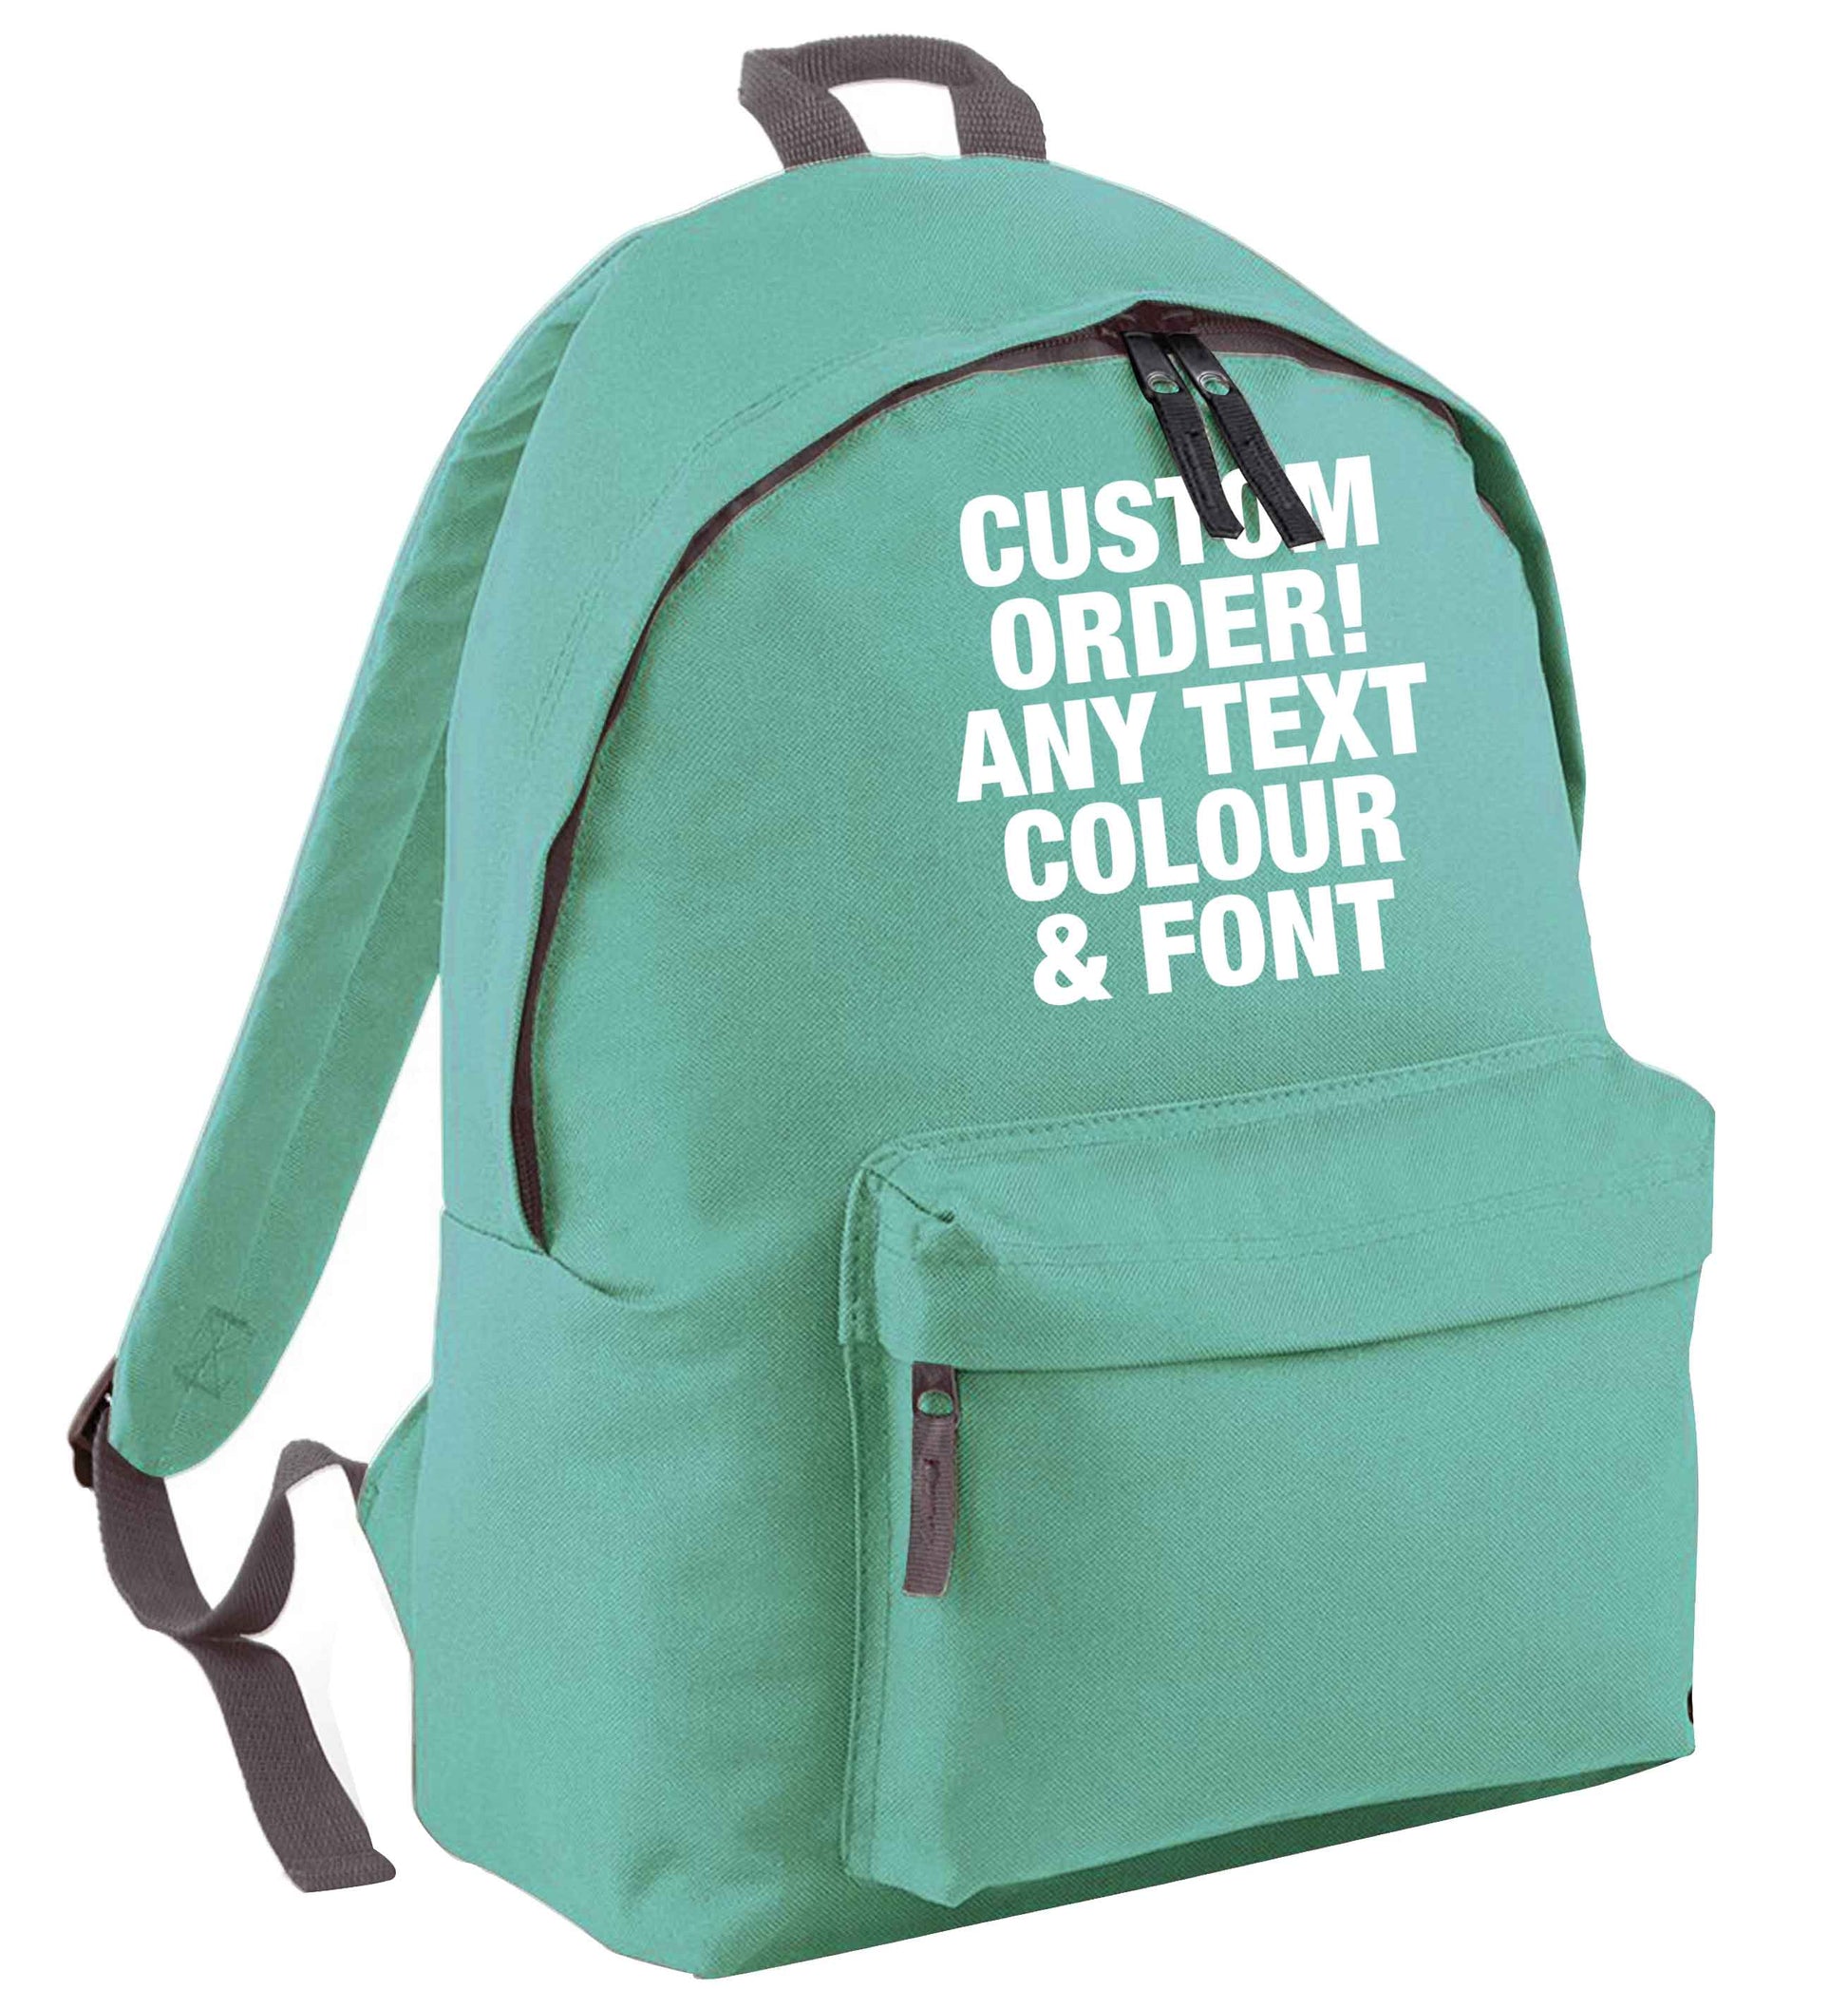 Custom order any text colour and font mint adults backpack